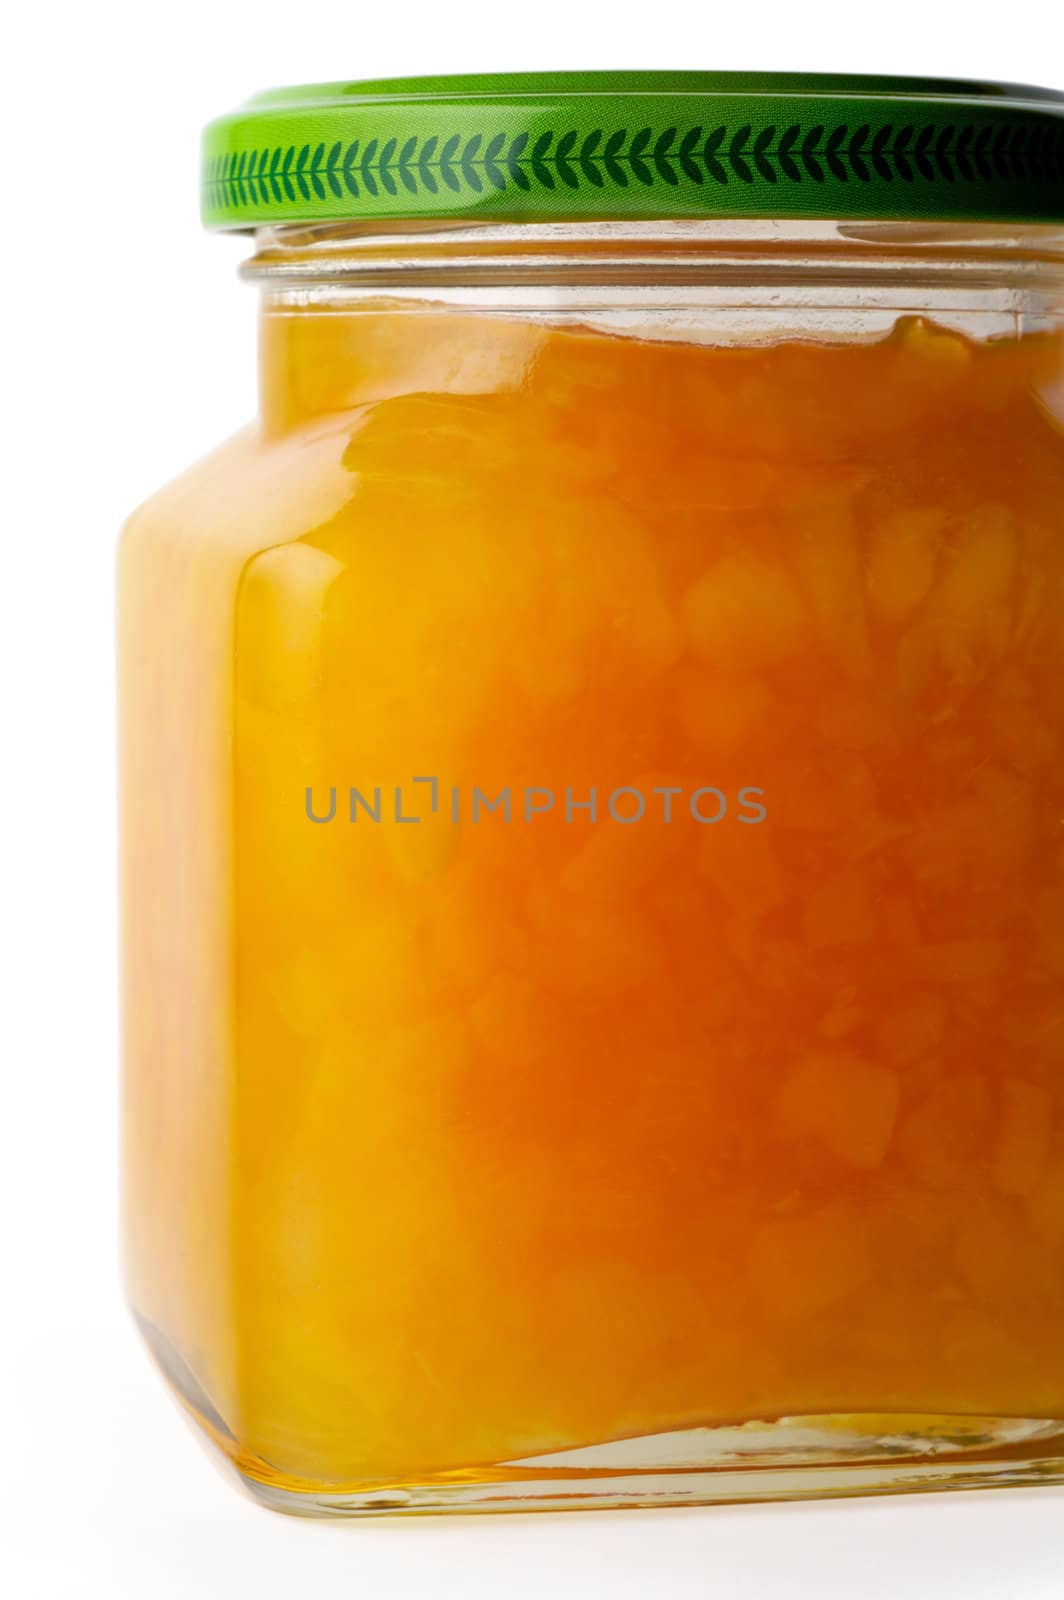 Peach jam on squared jar (1) with clipping path